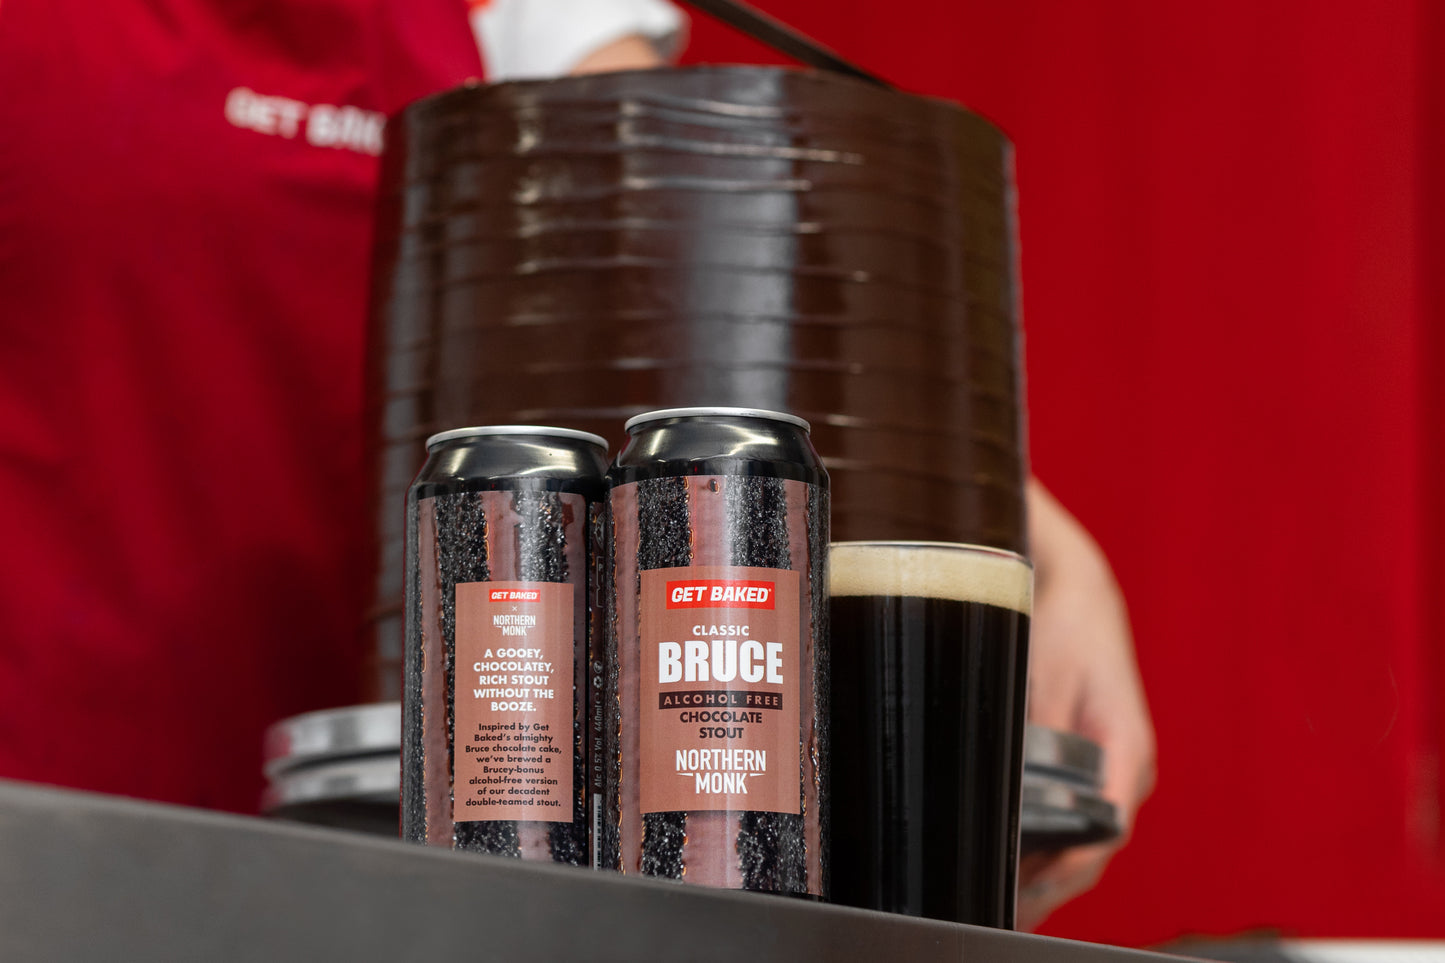 ALCOHOL FREE BRUCE // GET BAKED // N/A CHOCOLATE STOUT